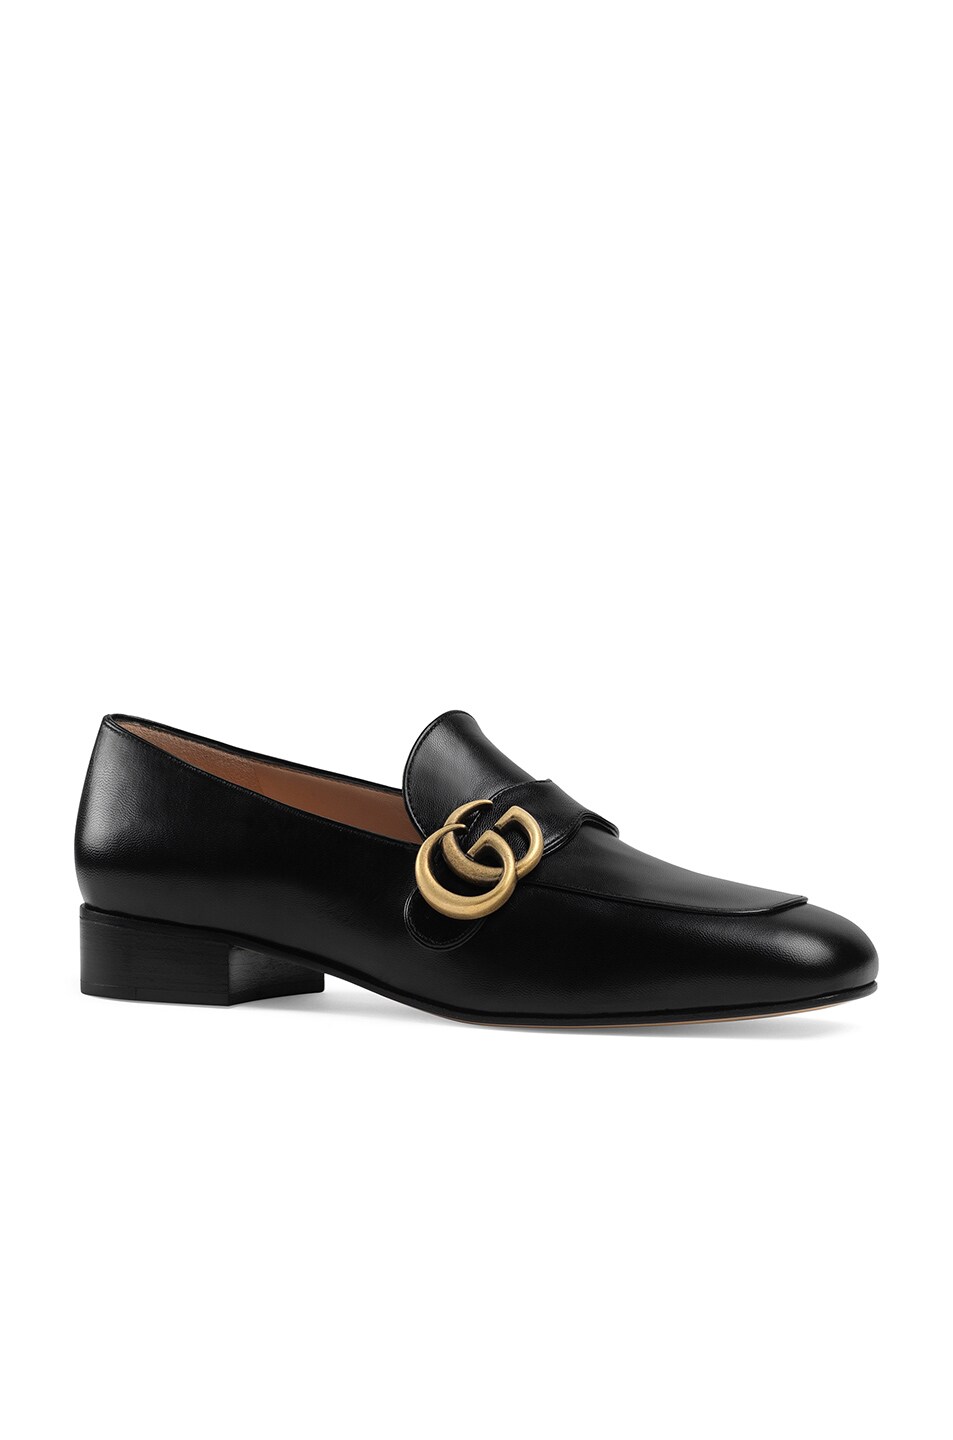 Gucci Double G Leather Loafers in Black | FWRD